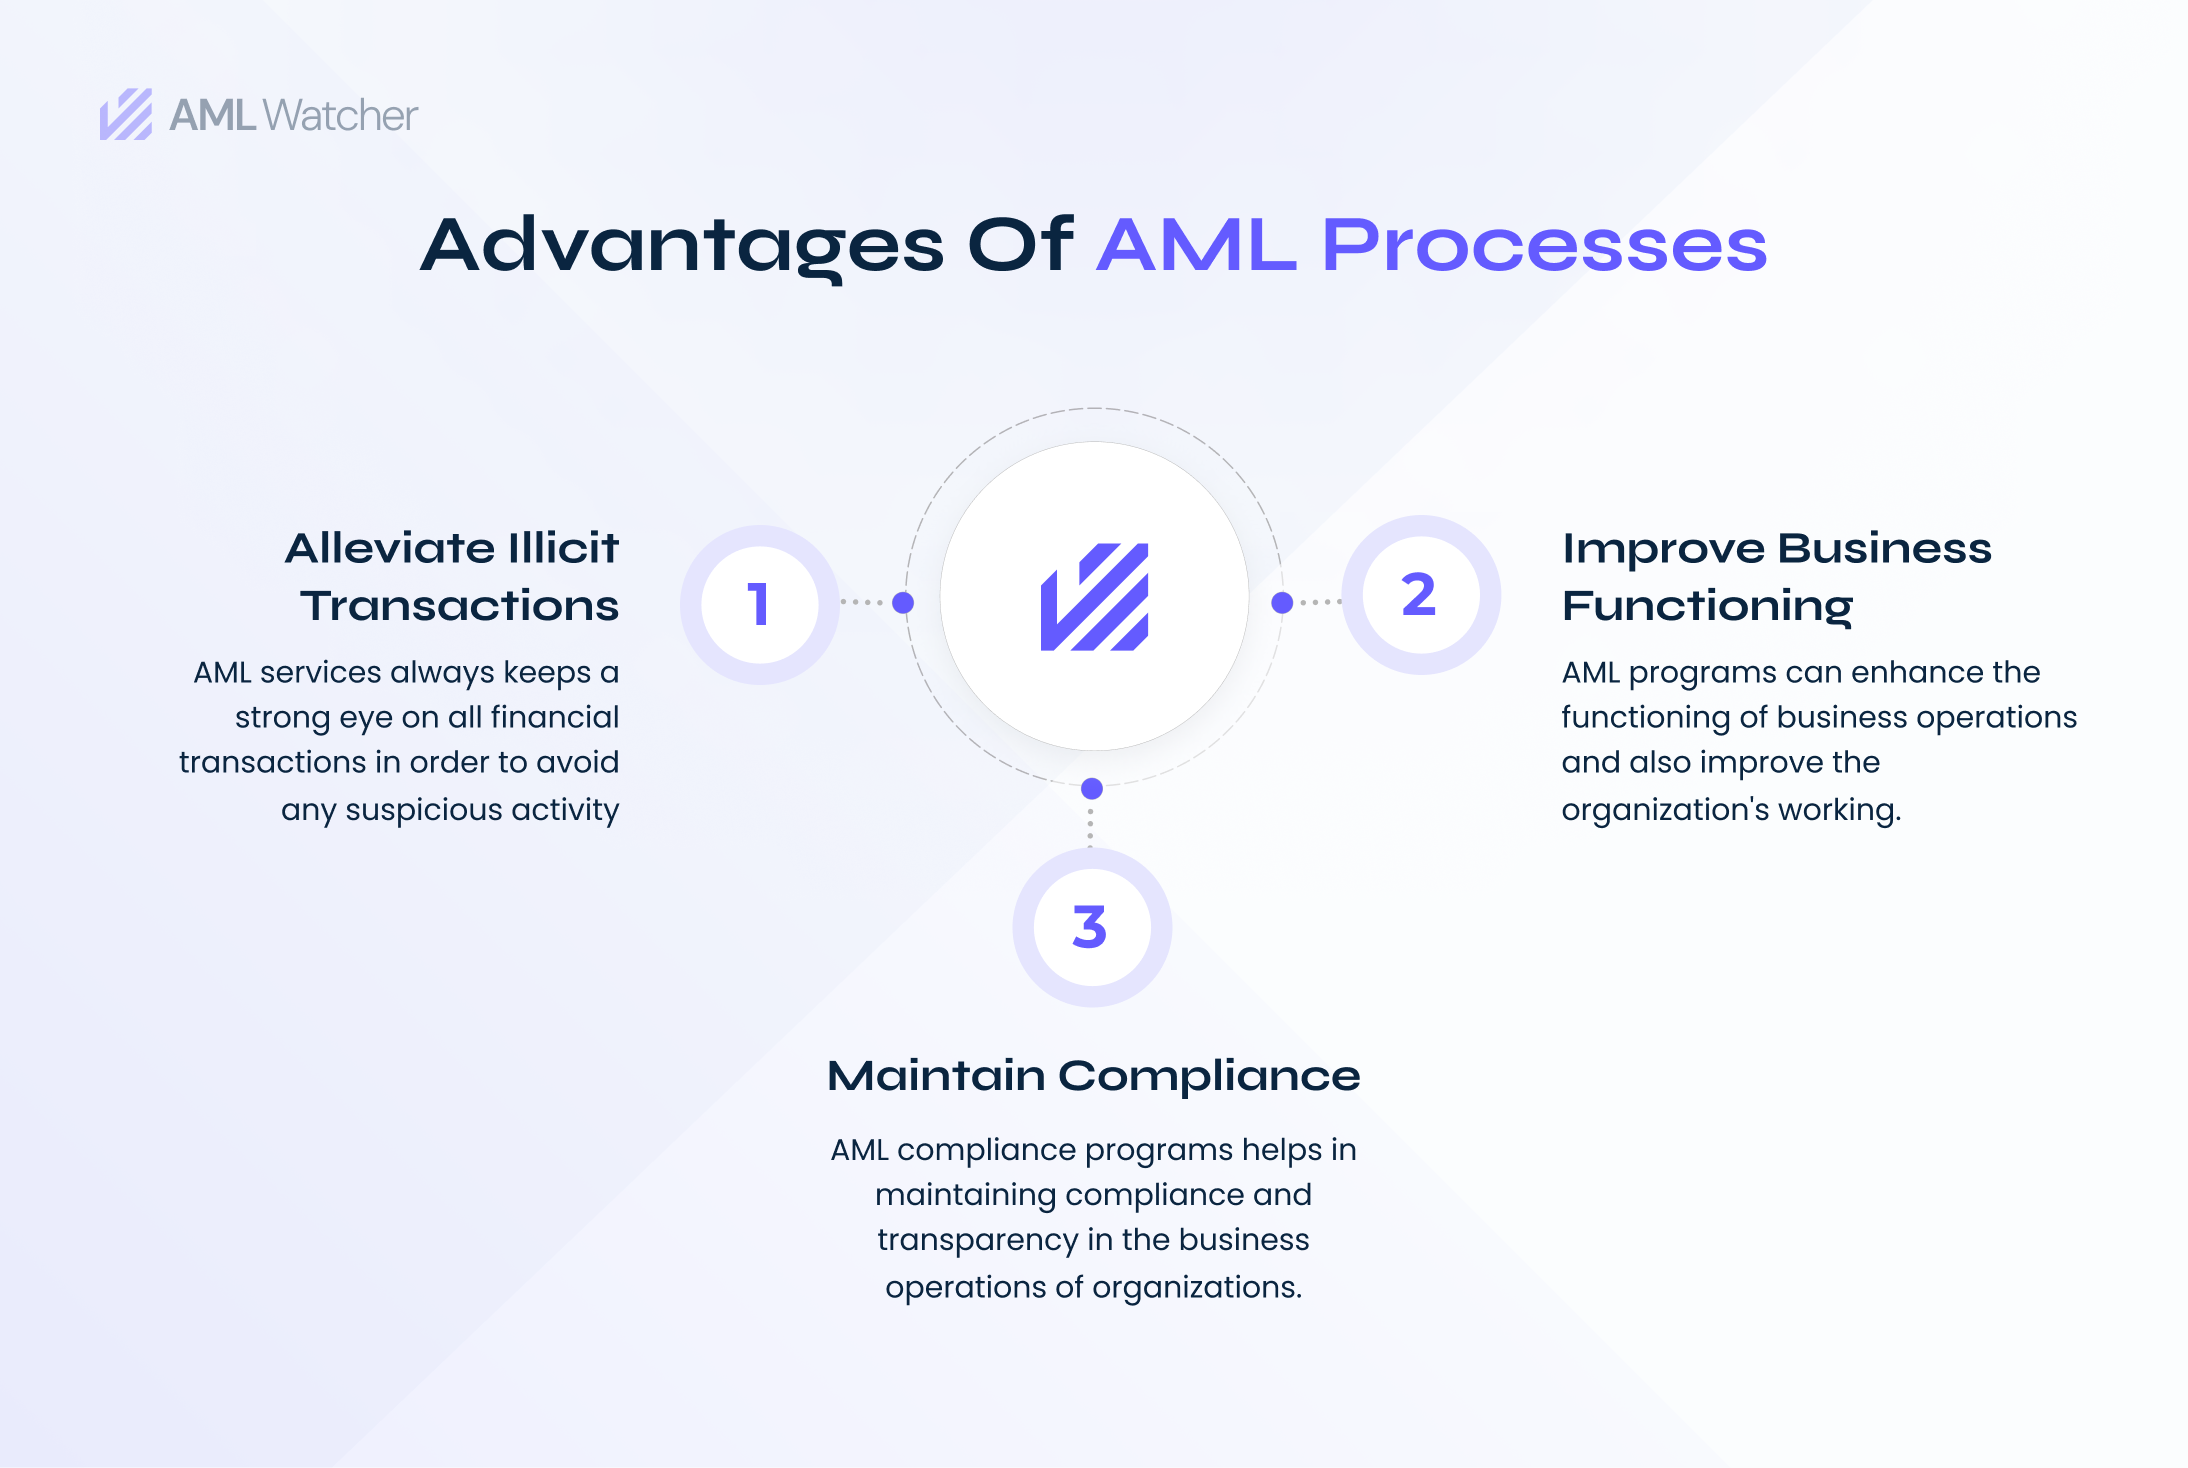 There are a large number of perks that organizations can enjoy with the help of AML services.